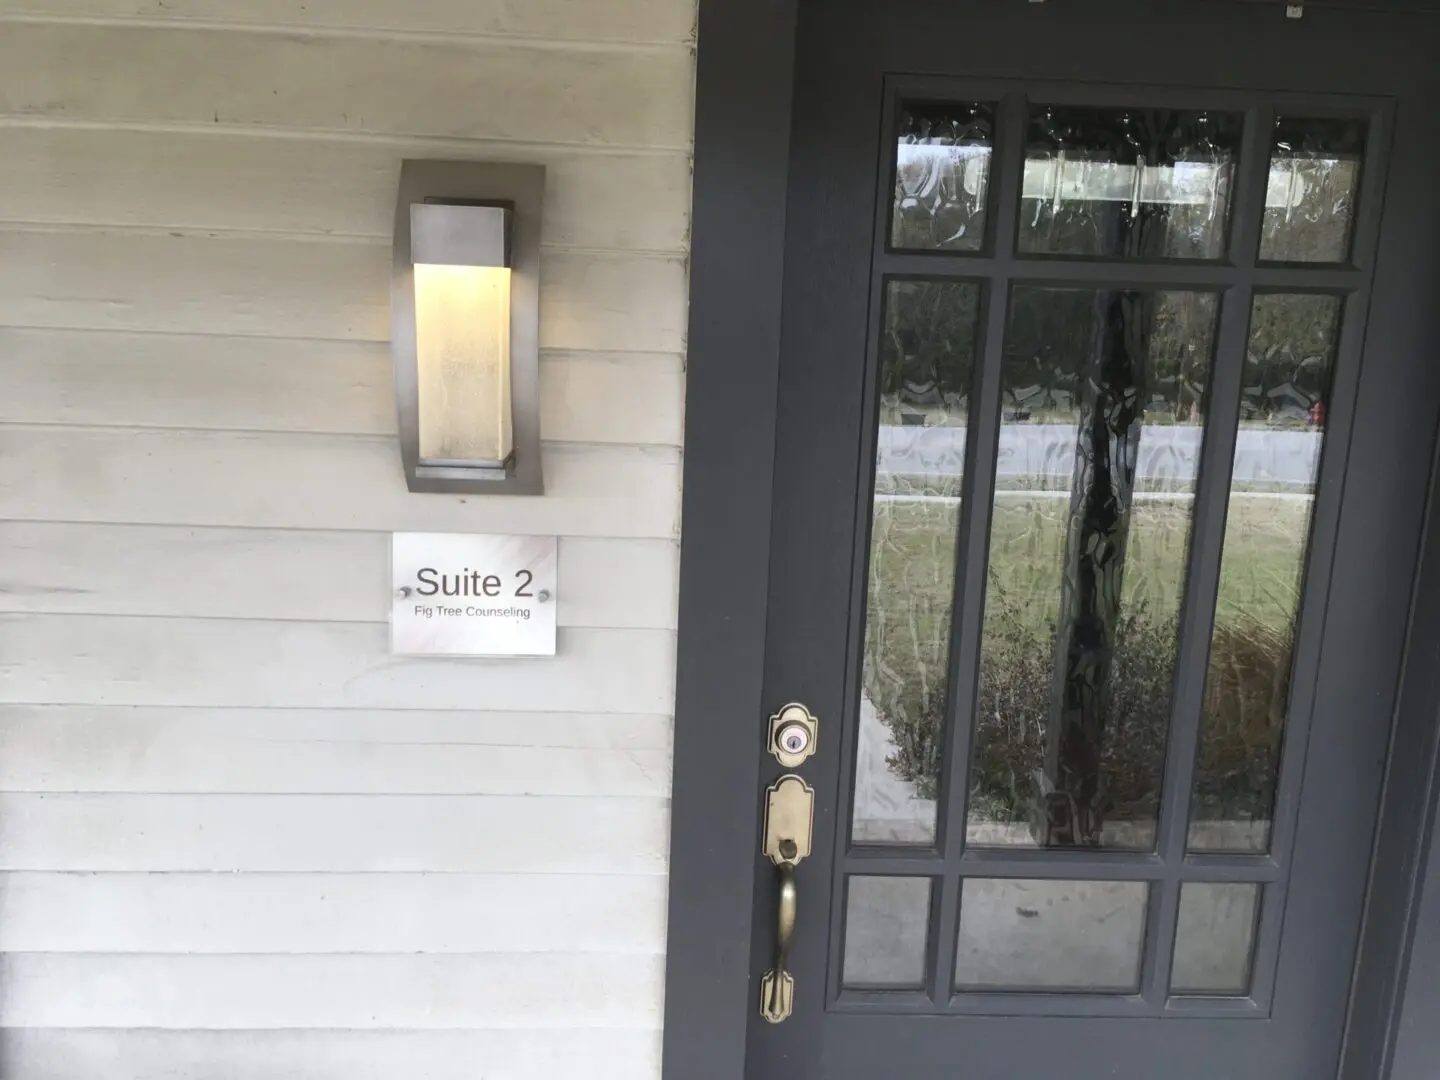 A door with a sign on it that says " suite 7 ".